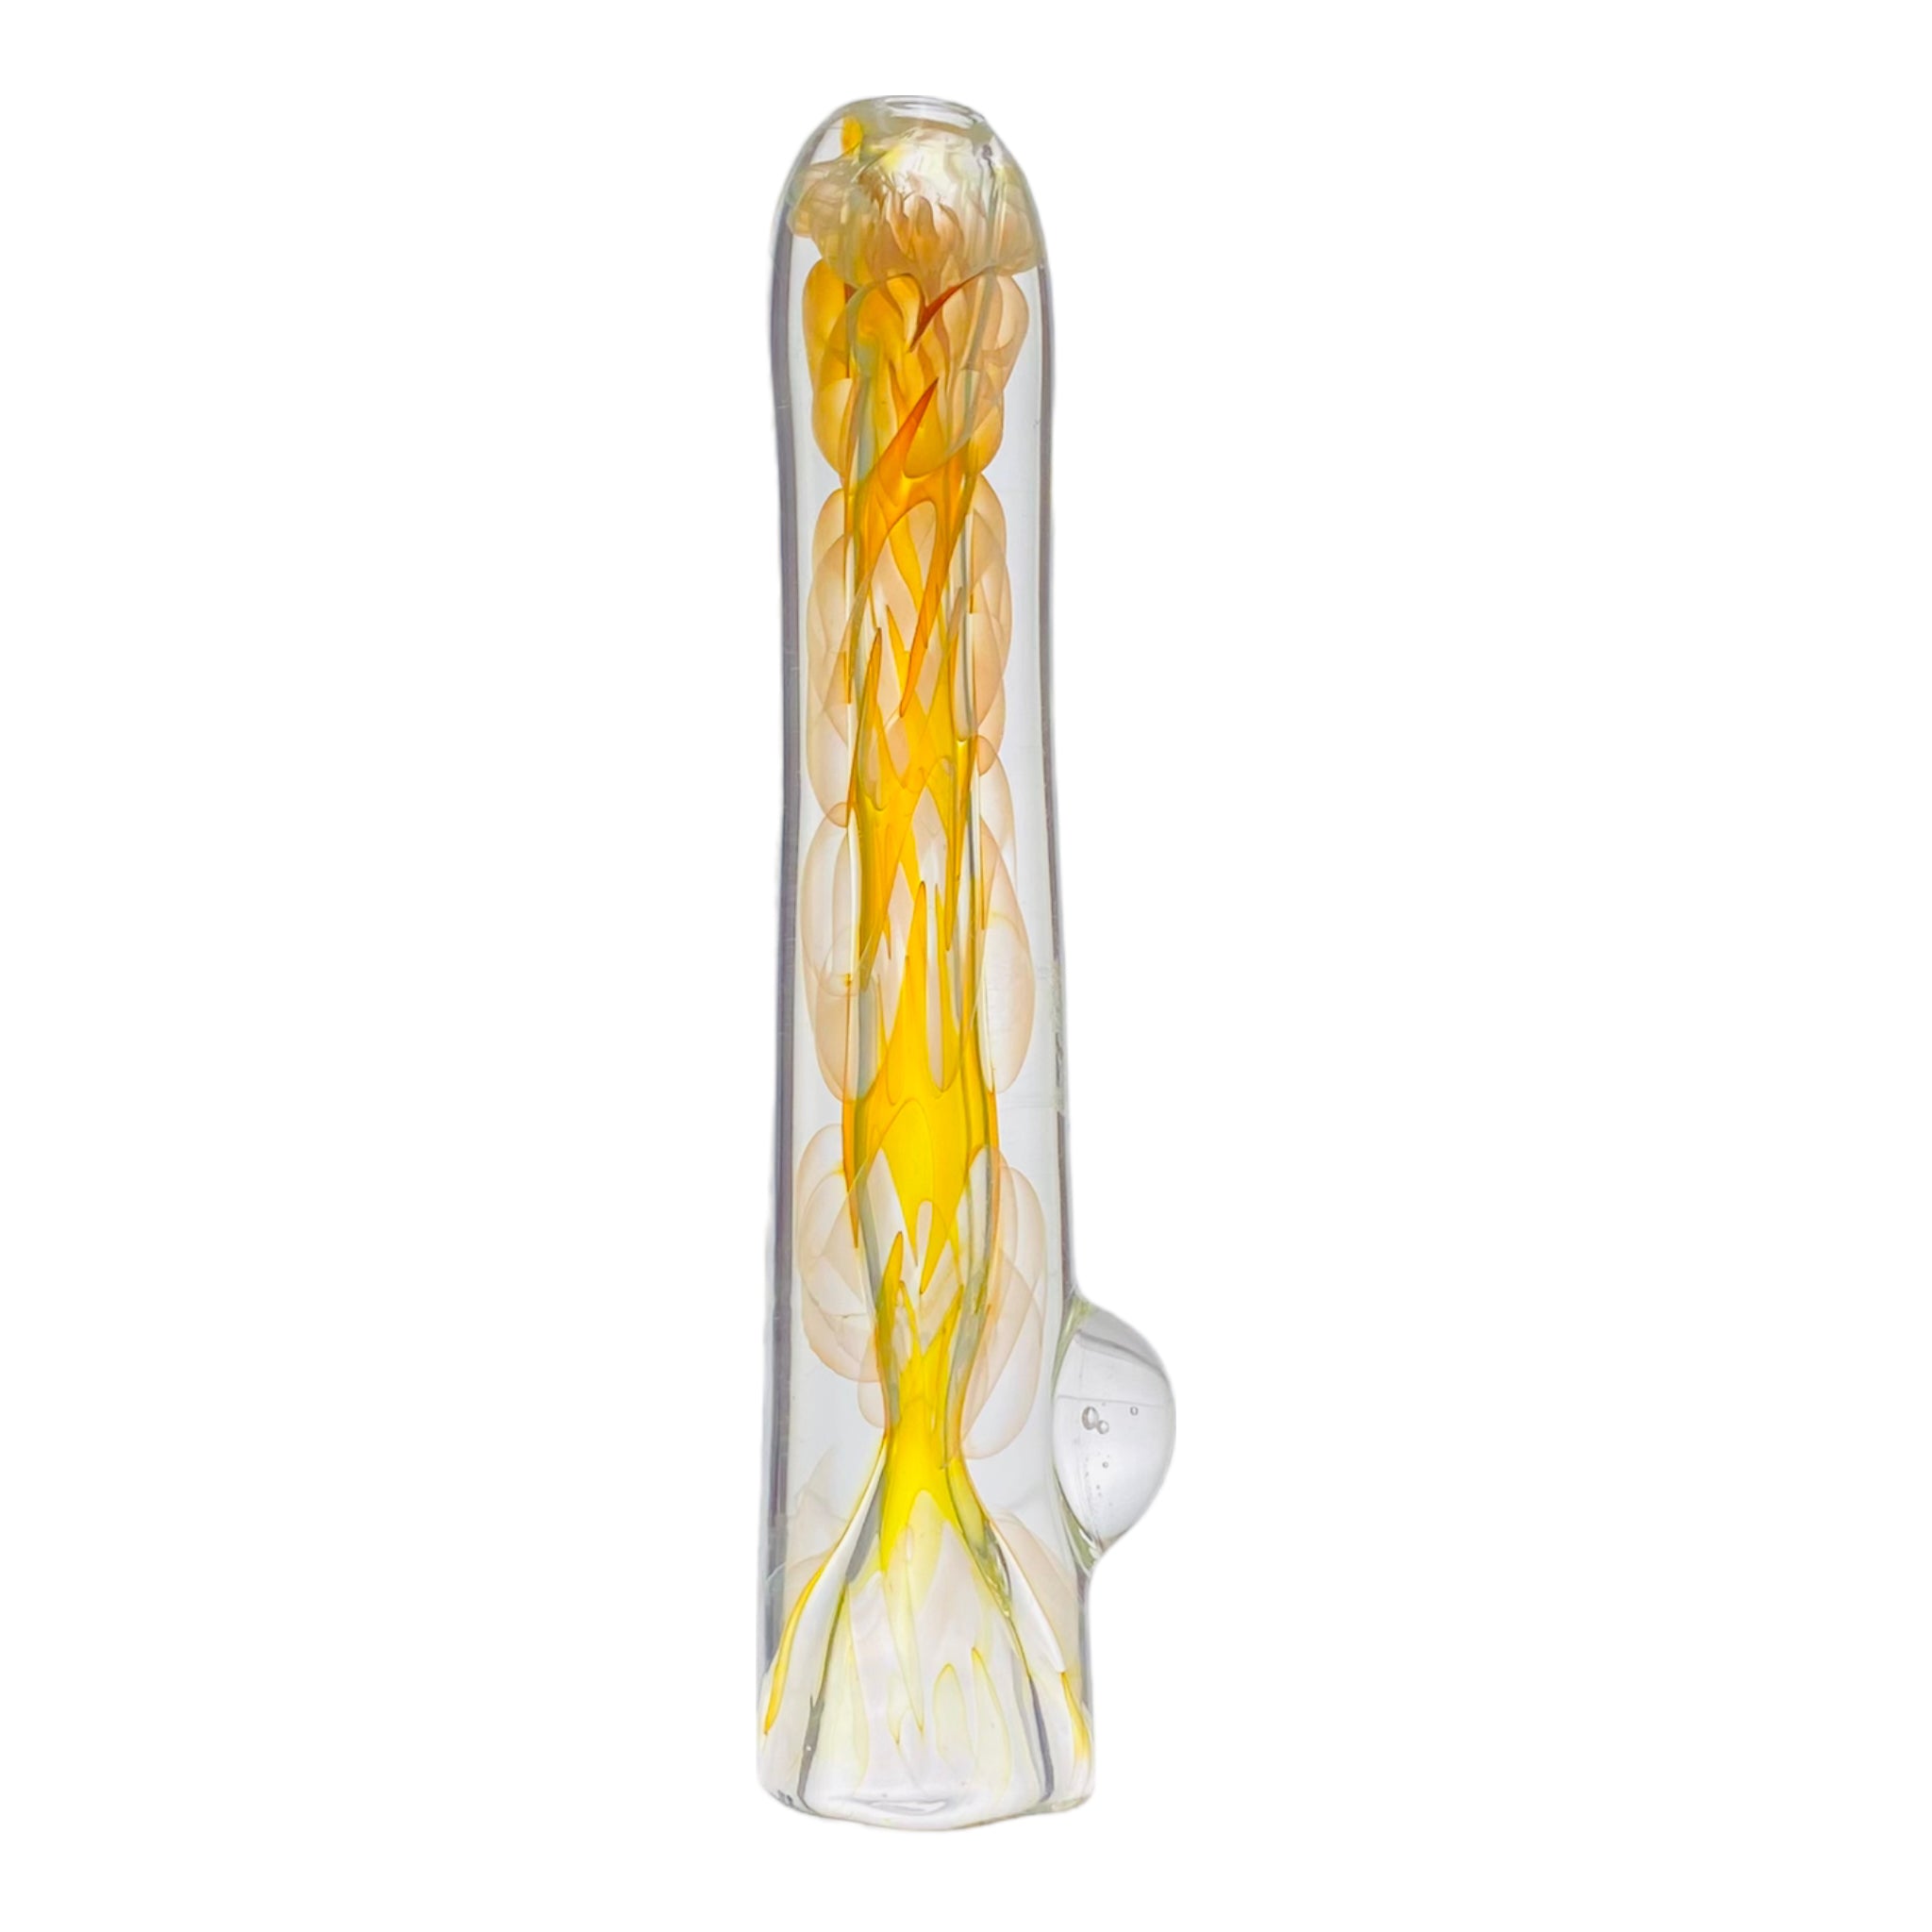 Glass Chillum Pipe - Yellow Silver Fuming Inside Out Explosion